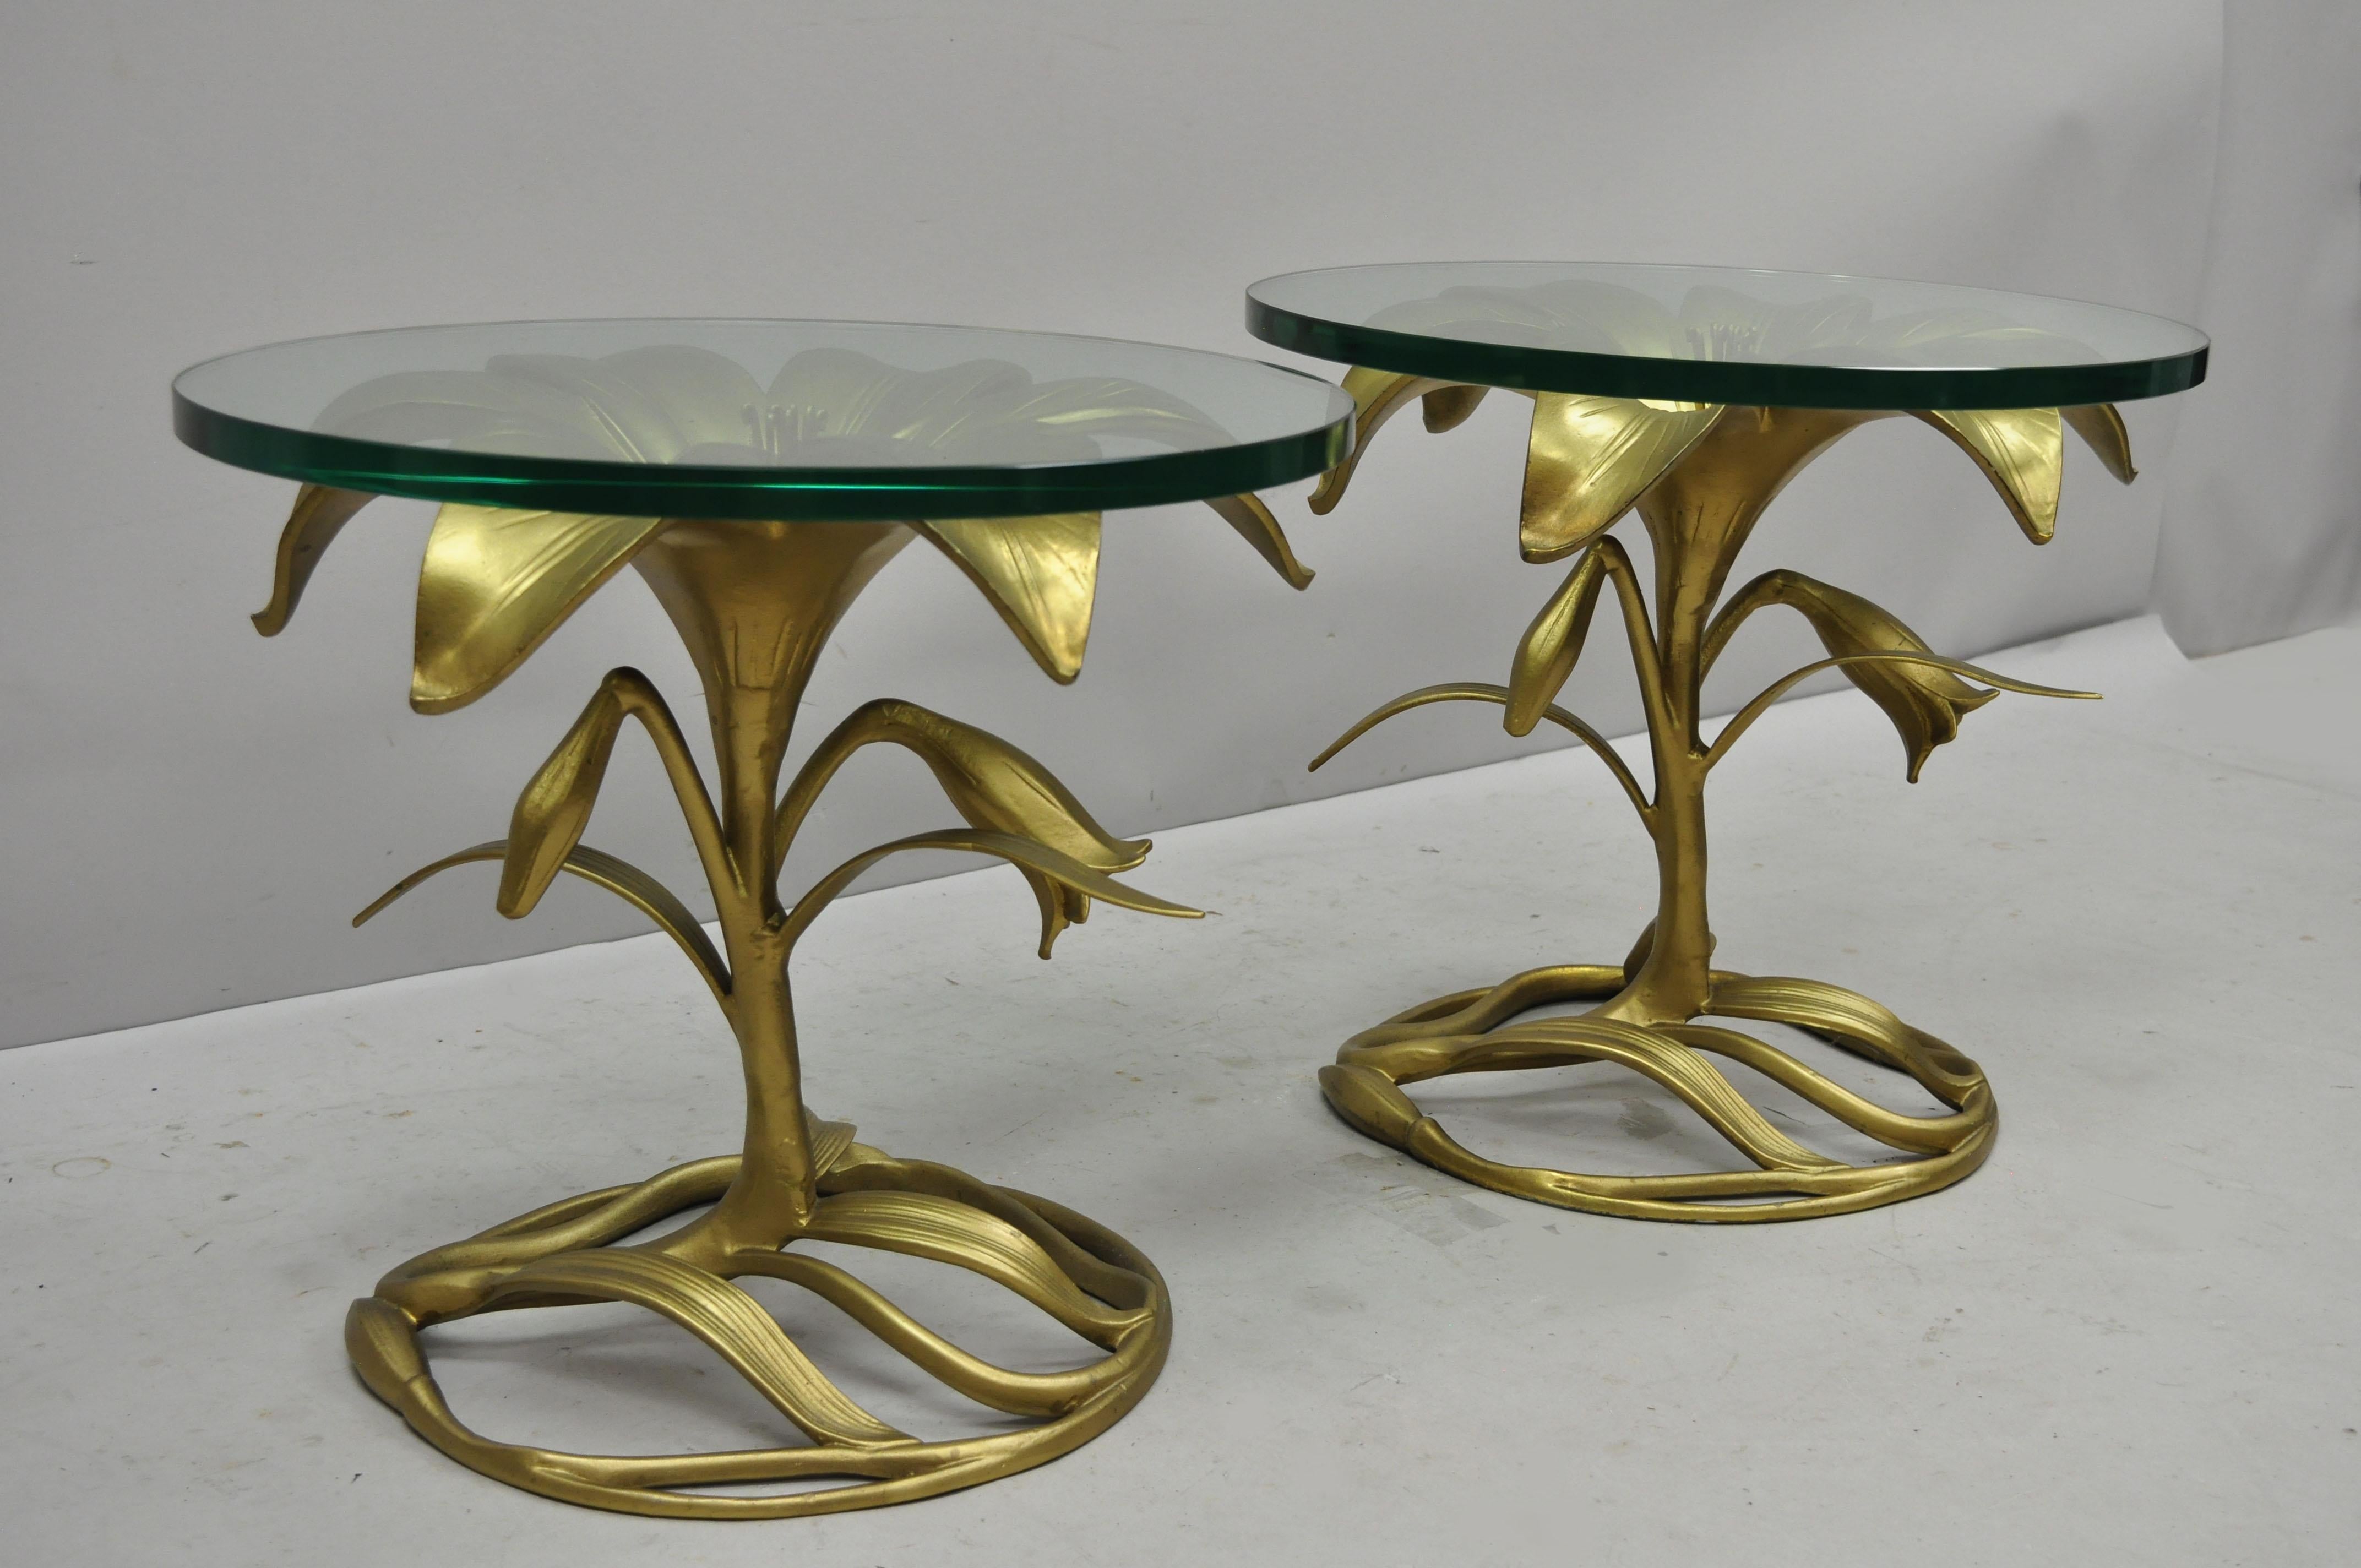 Pair of vintage Arthur court gold lily flower glass top side tables. Item features cast metal base, 0.75